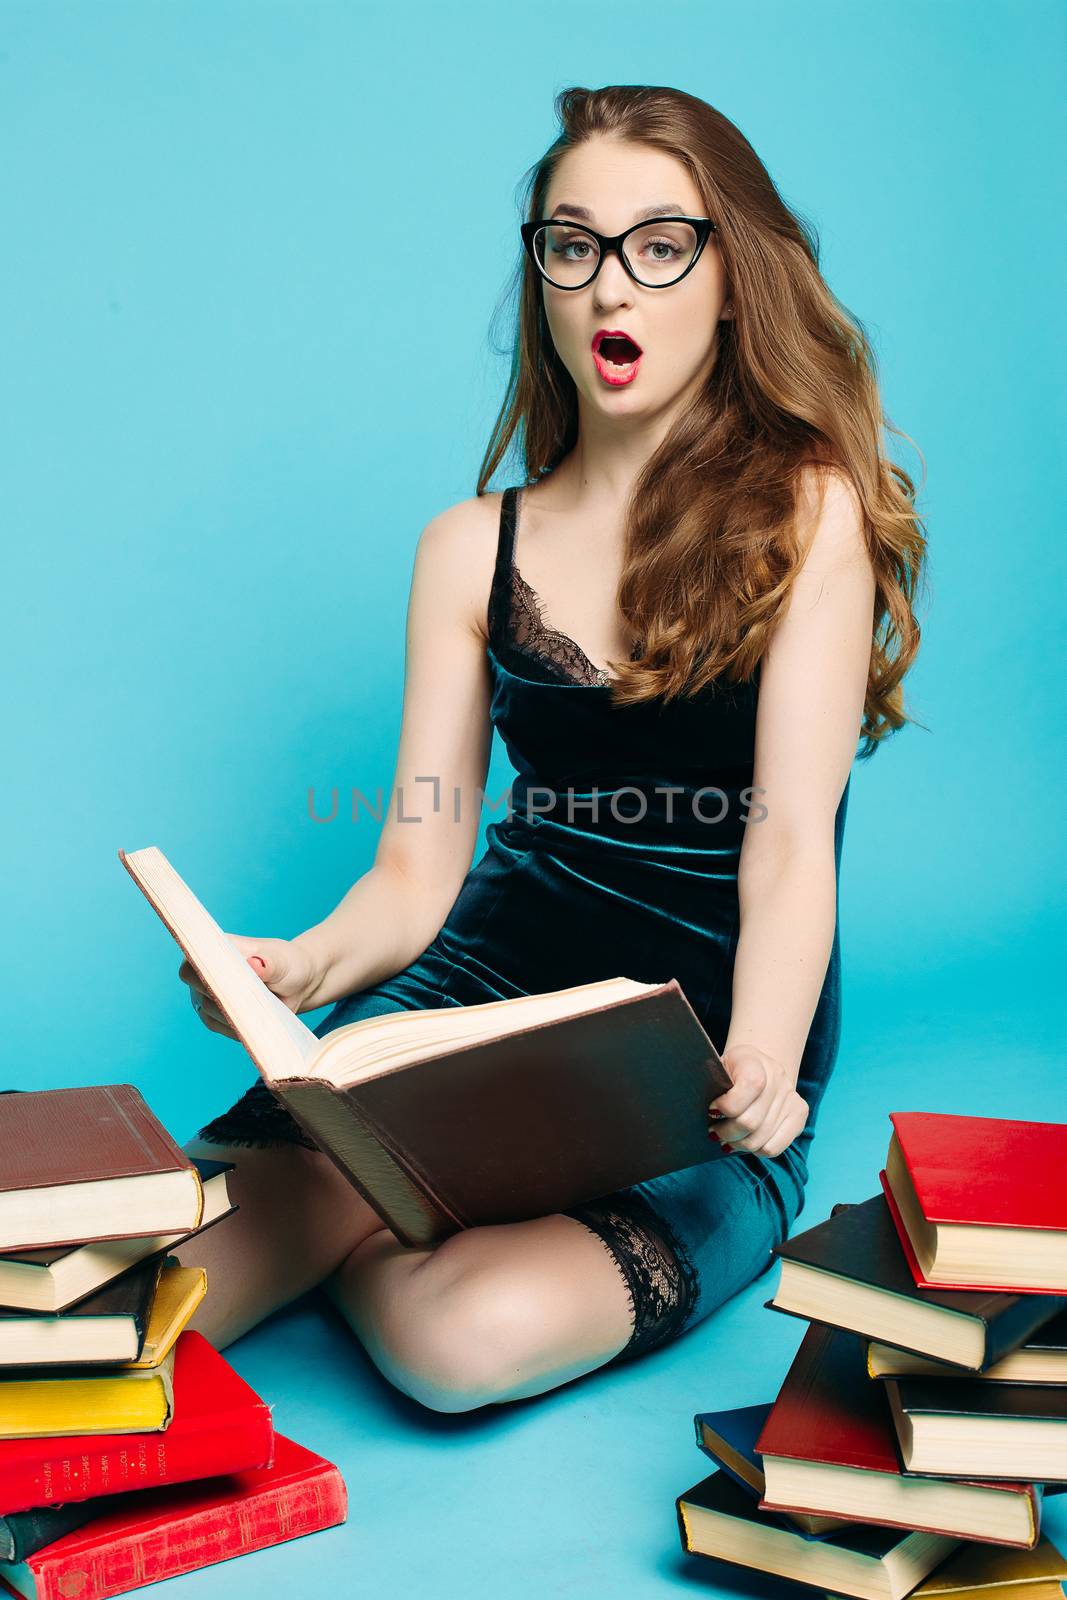 Sexy and smart teacher in green dress sitting on floor among many colorful books, holding heels and making duck face. Beautiful and clever girl with red lips, in eyeglasses. Fashionable concept.